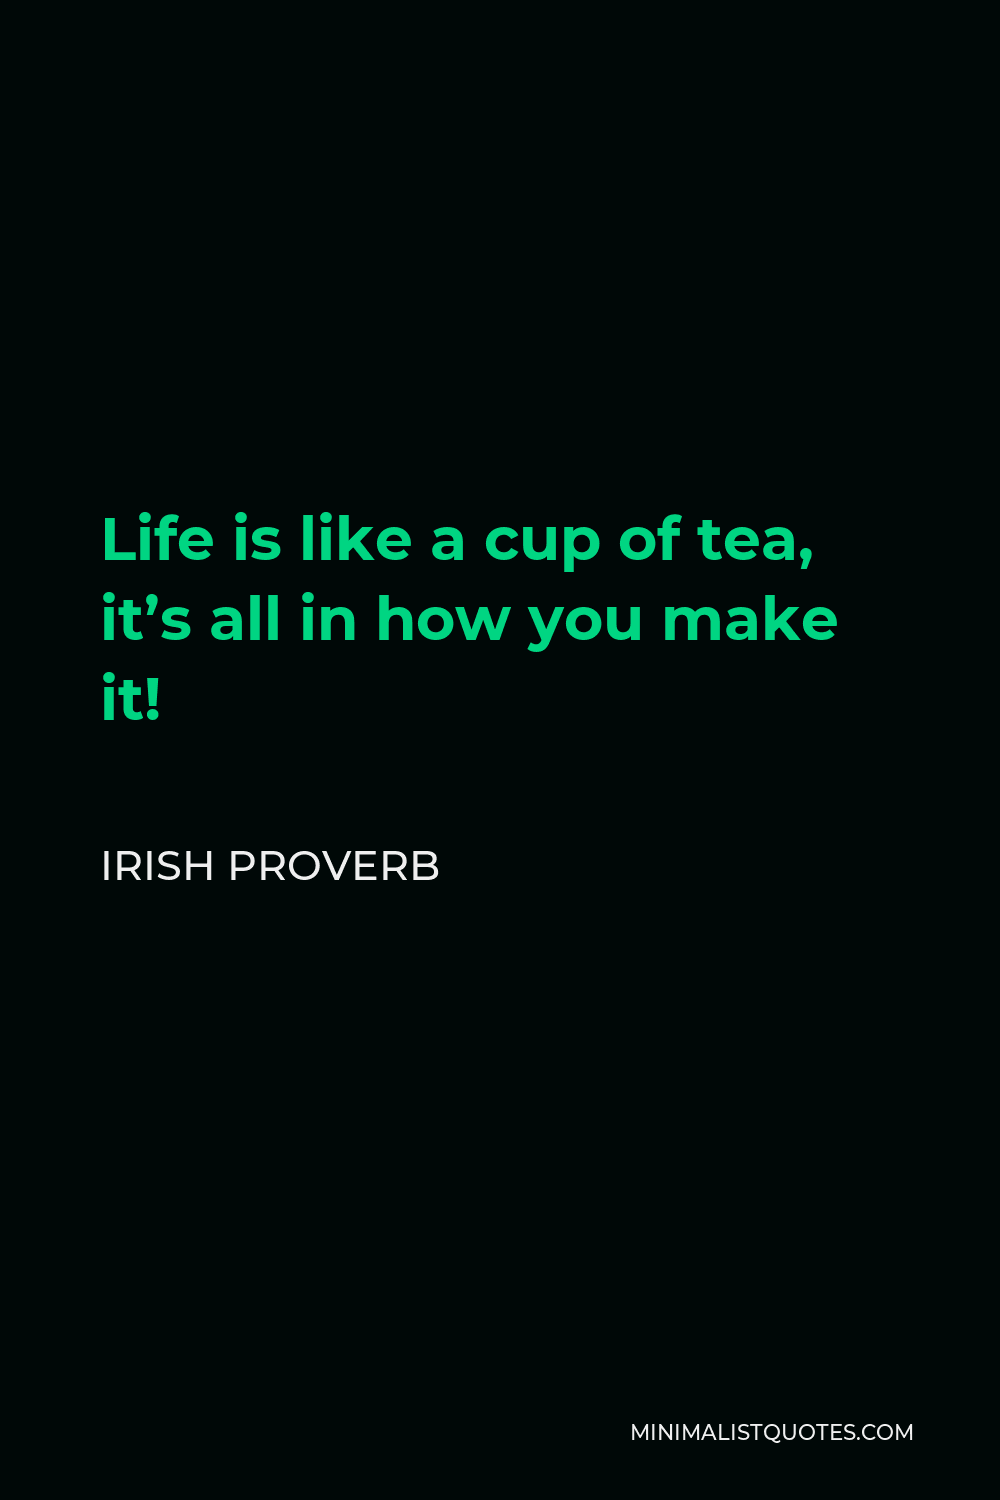 Irish Proverb Quote - Life is like a cup of tea, it’s all in how you make it!